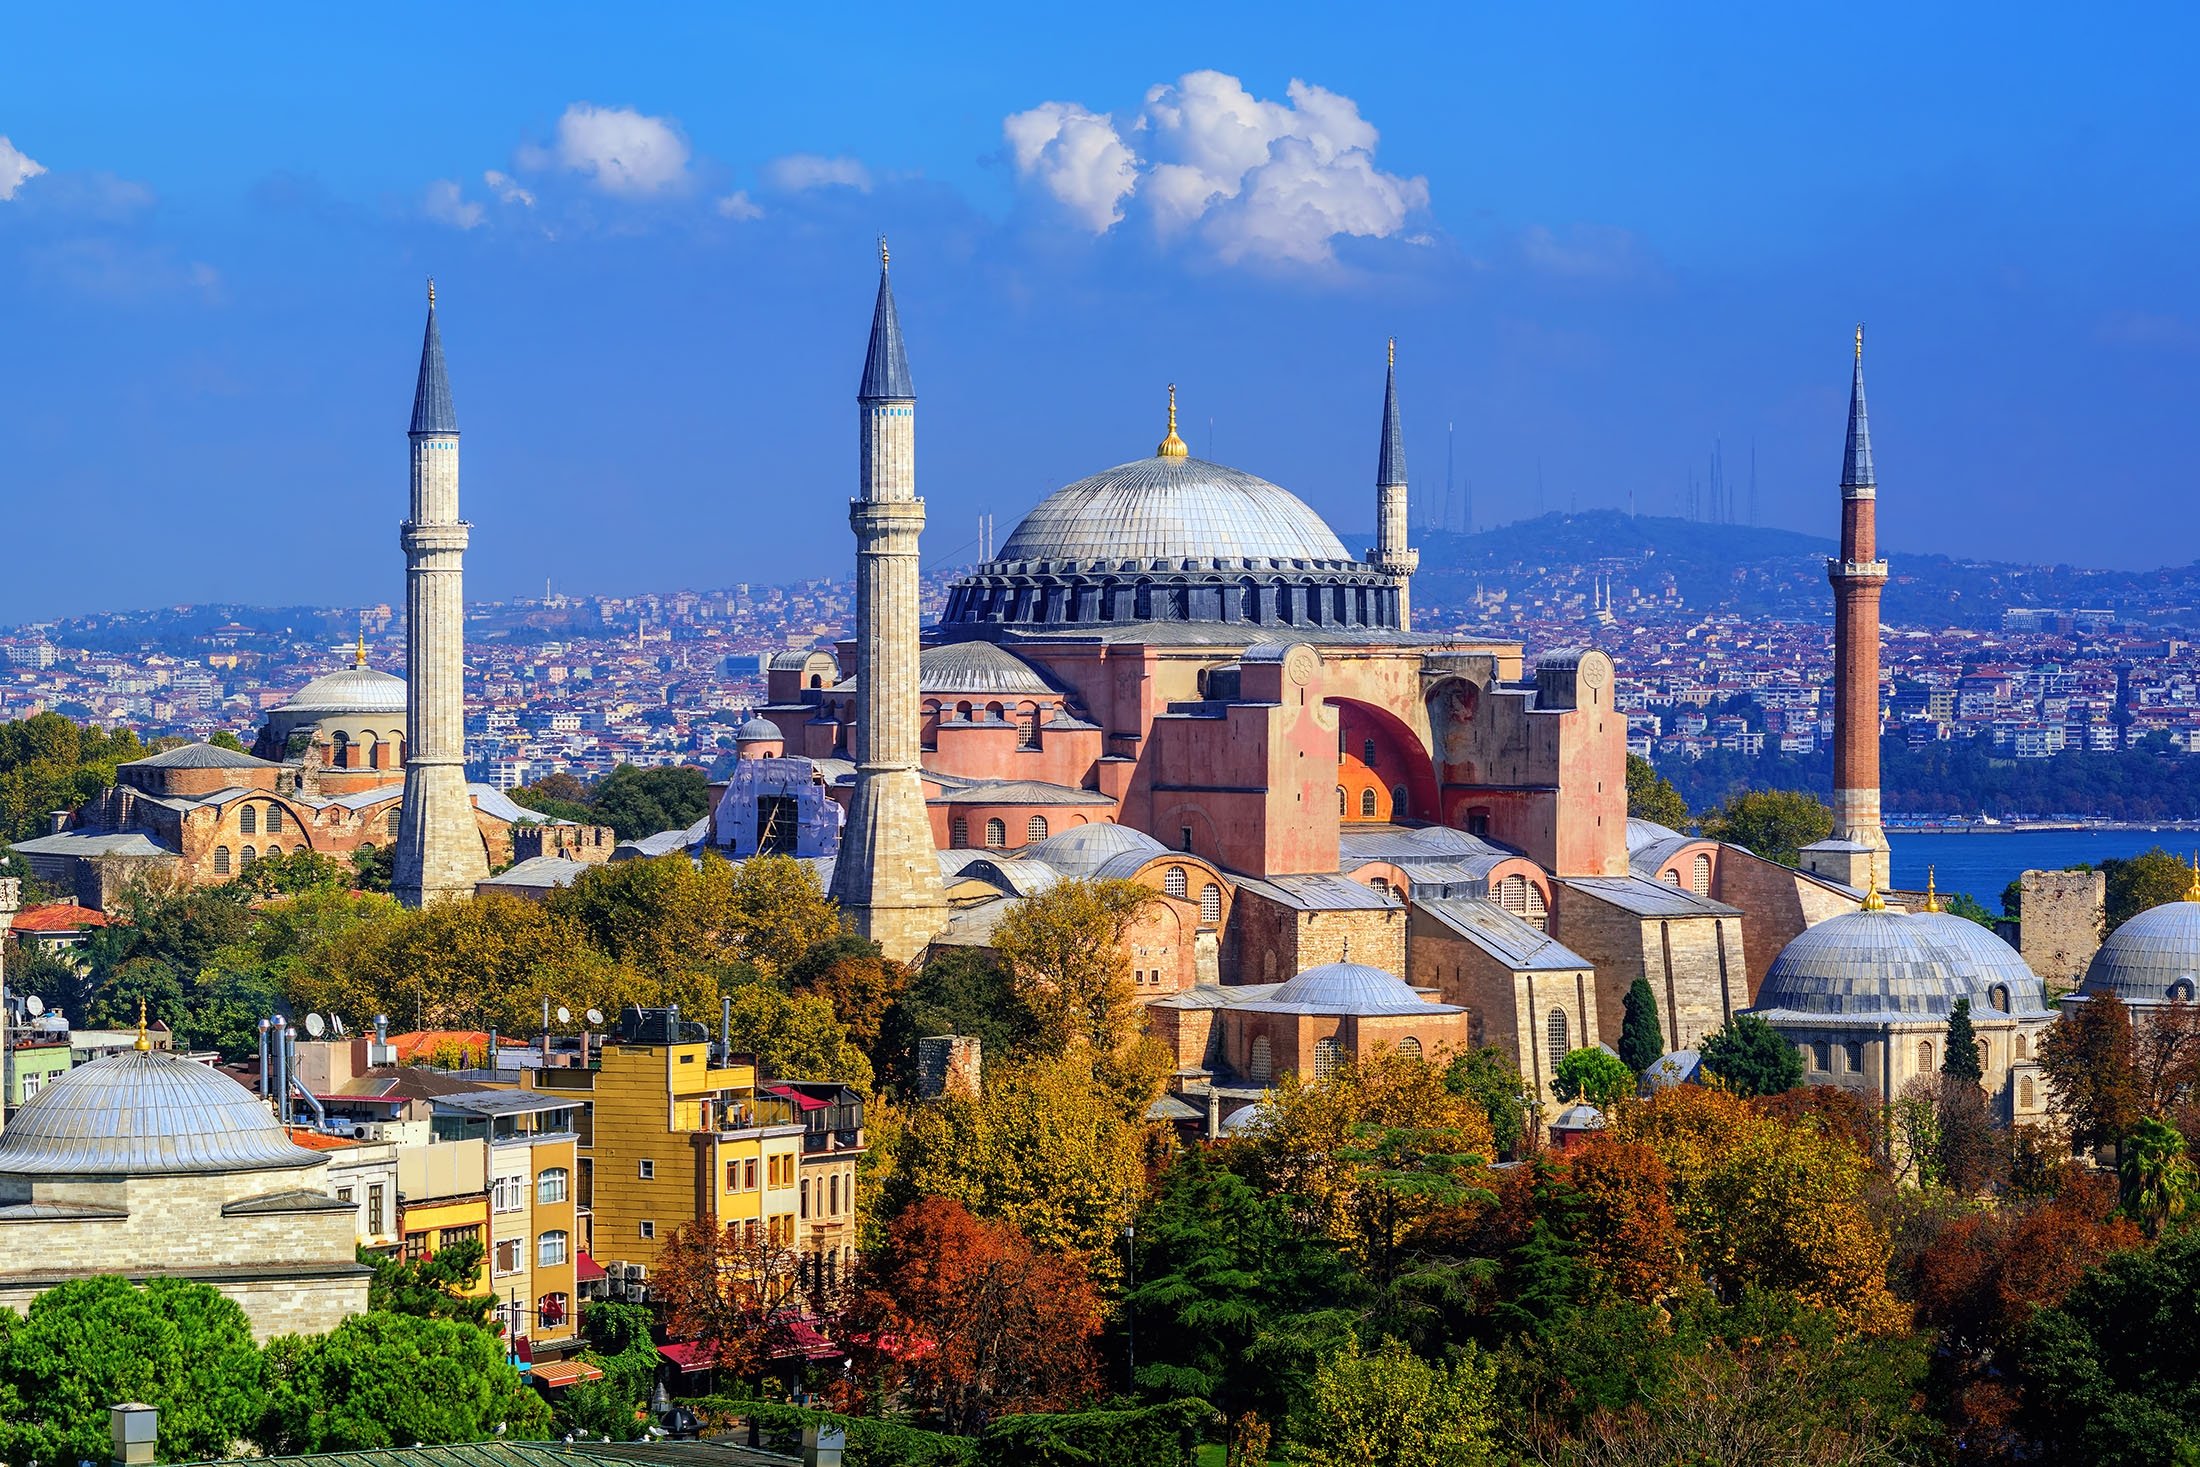 An aerial view of the Hagia Sophia Grand Mosque, in Istanbul, Türkiye. (Shutterstock Photo)